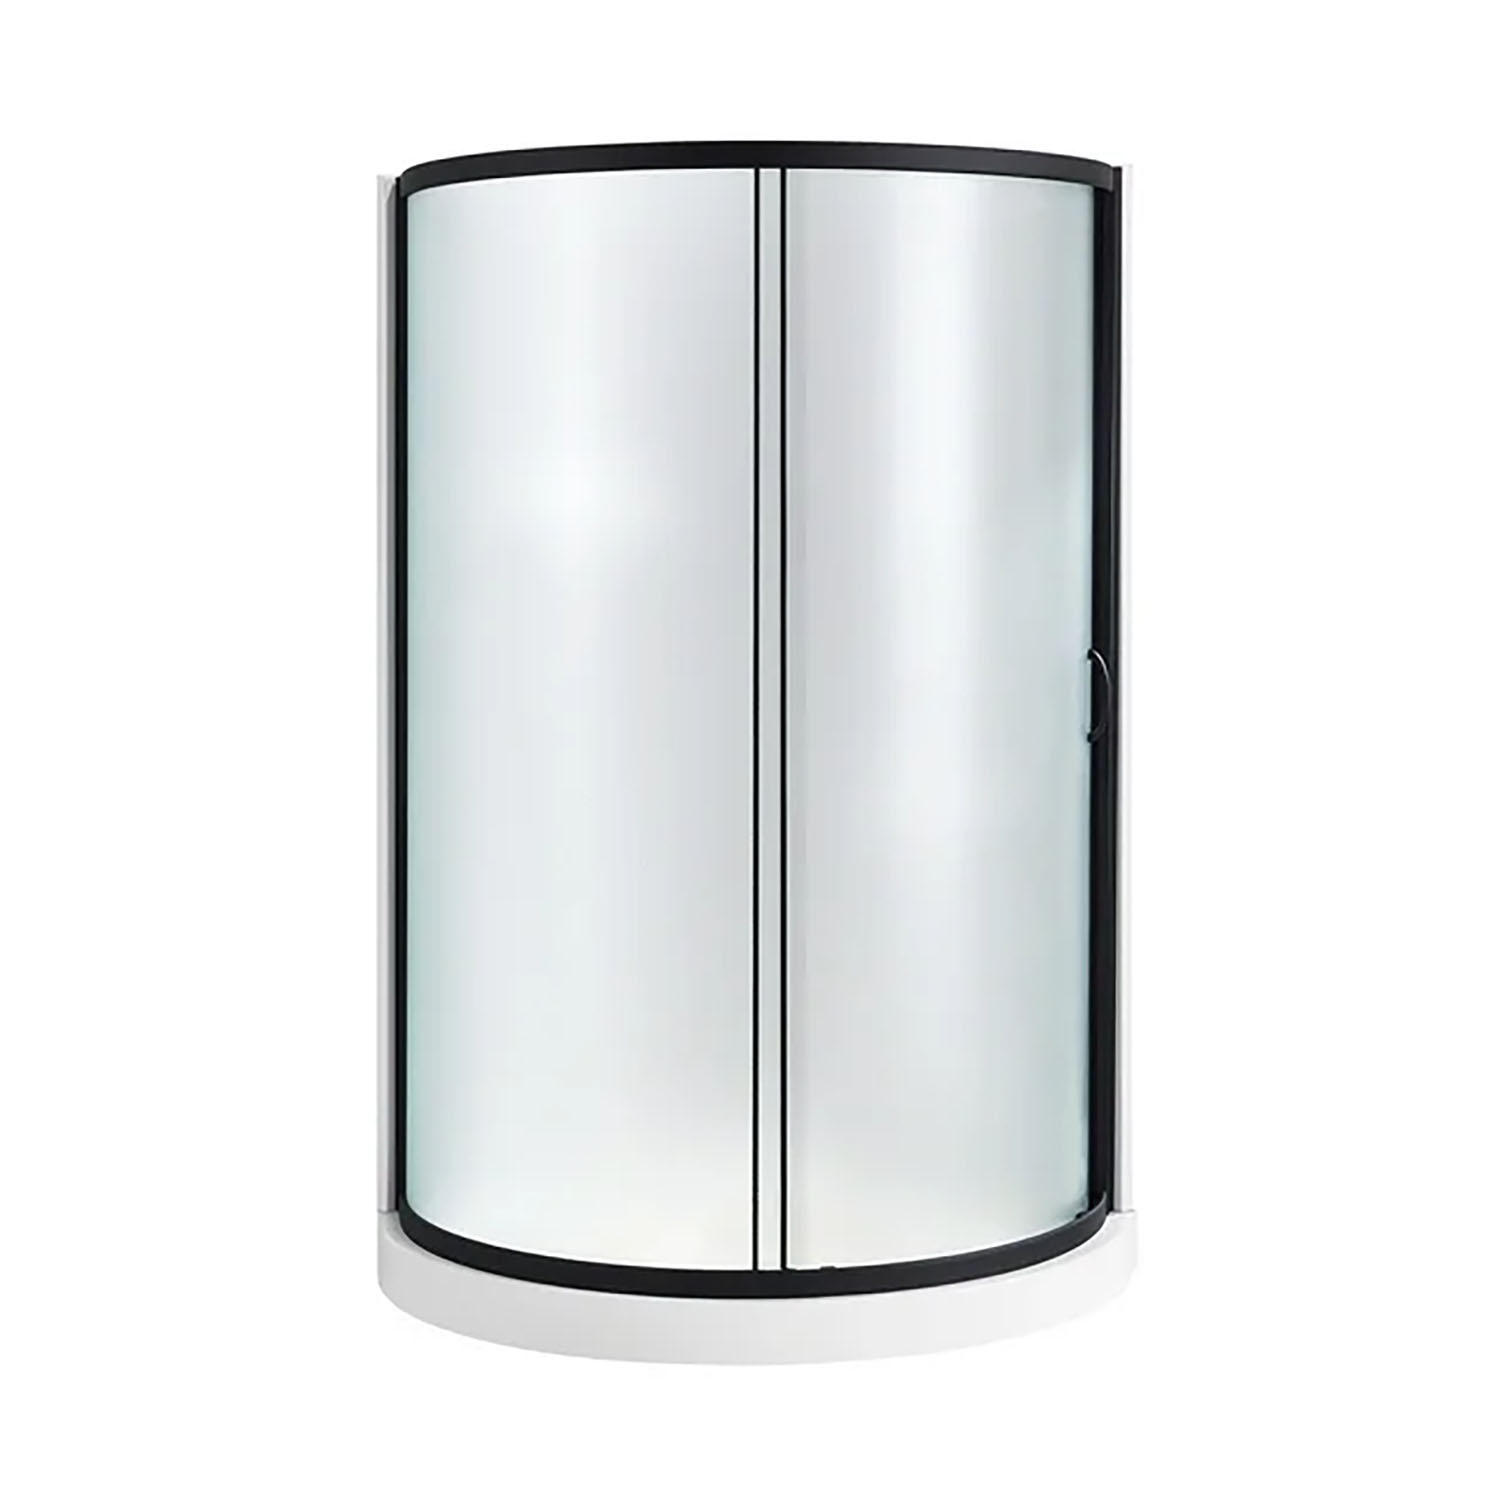 OVE Decors Breeze 36 in x 36 in x 77 in H Curved Corner Shower Kit with Frosted Glass, Walls, Base and Hardware - Matte